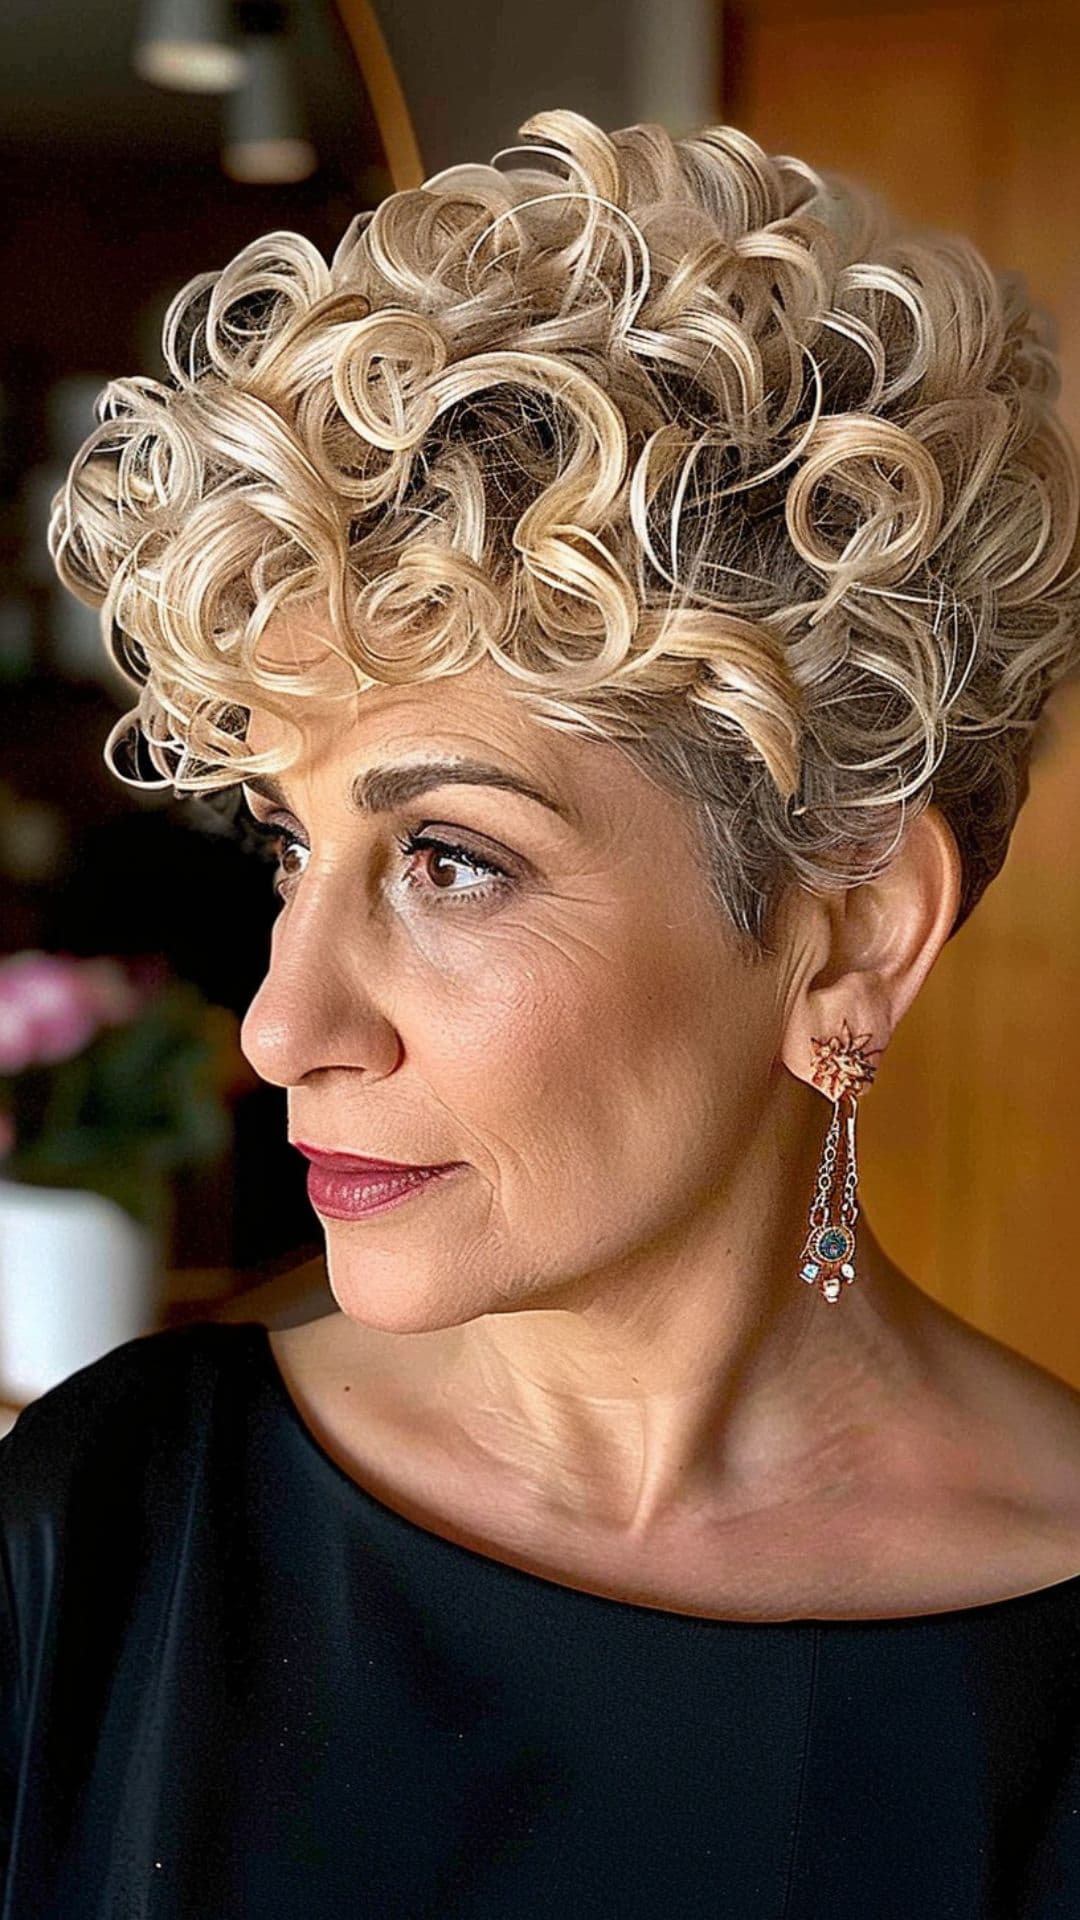 An old woman modelling a blonde curly pixie hair.